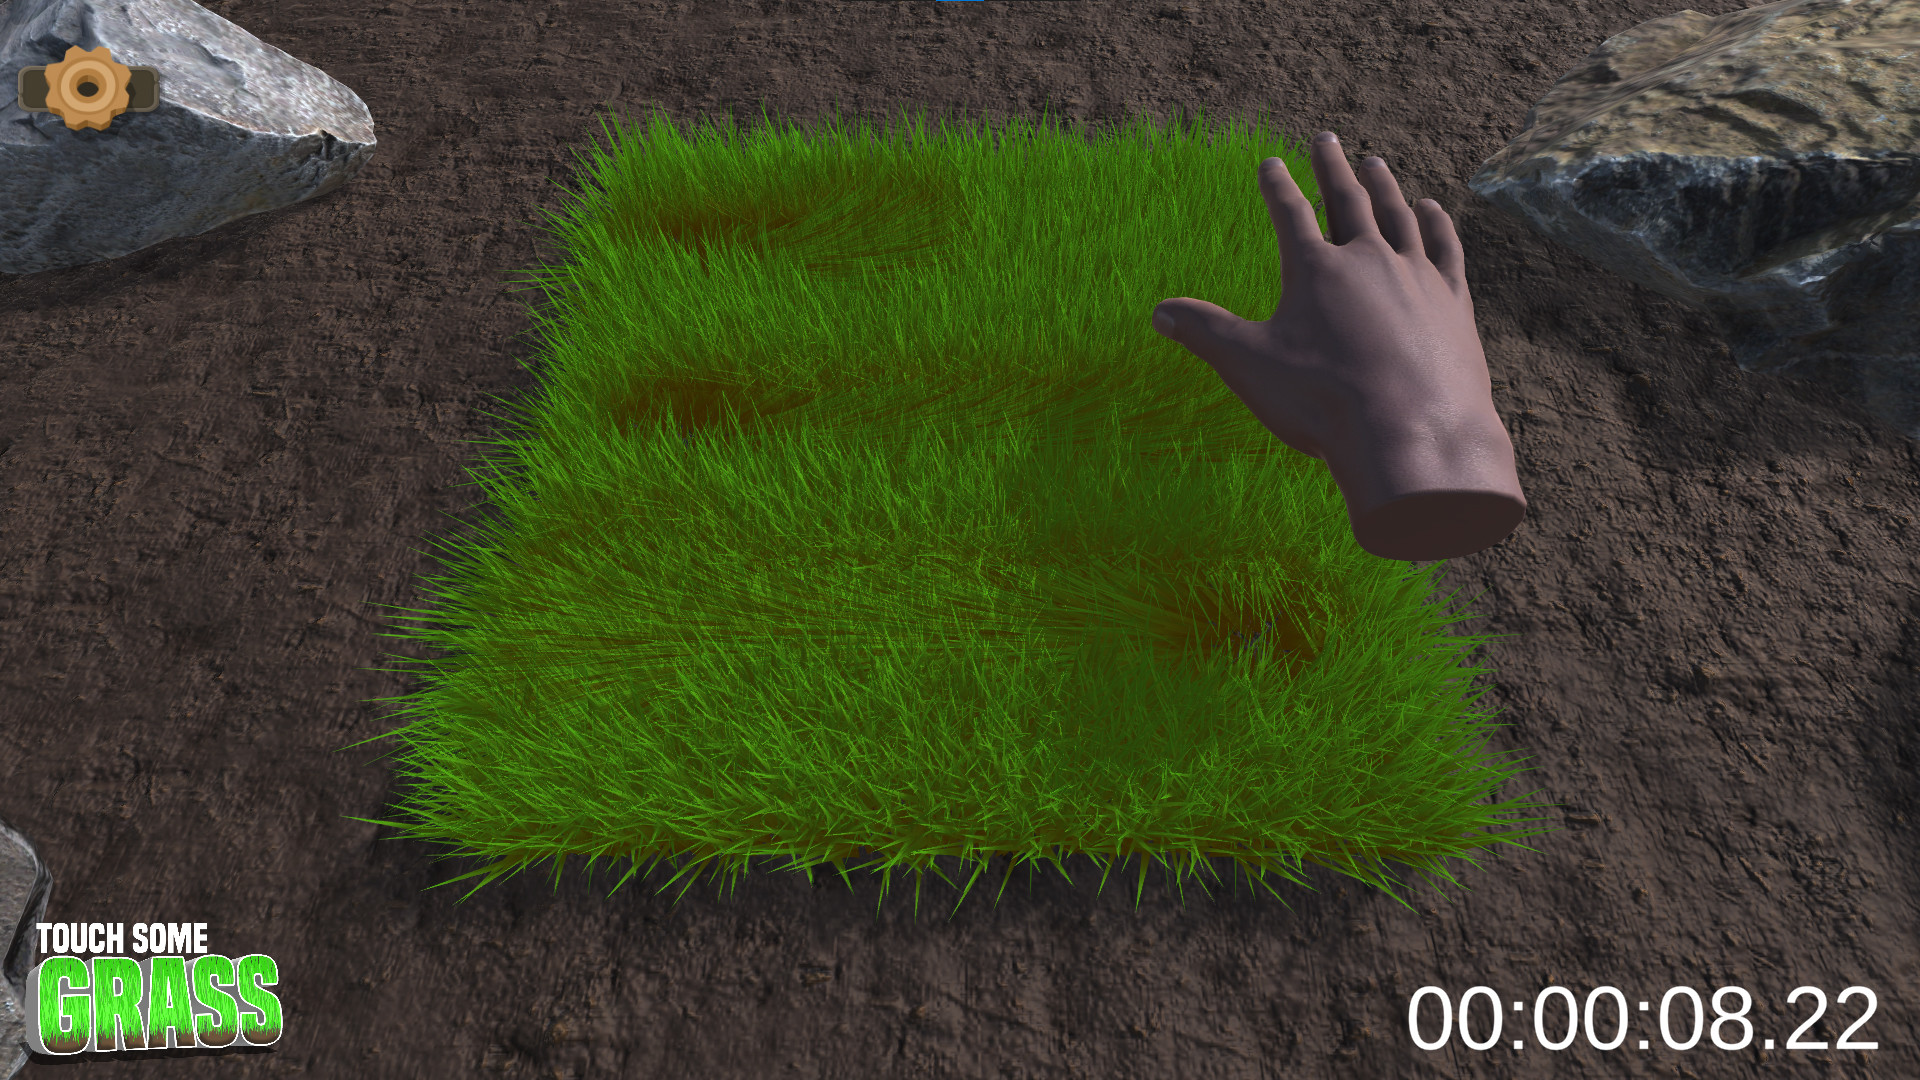 Steam Community :: Guide :: How 2 Touch Grass